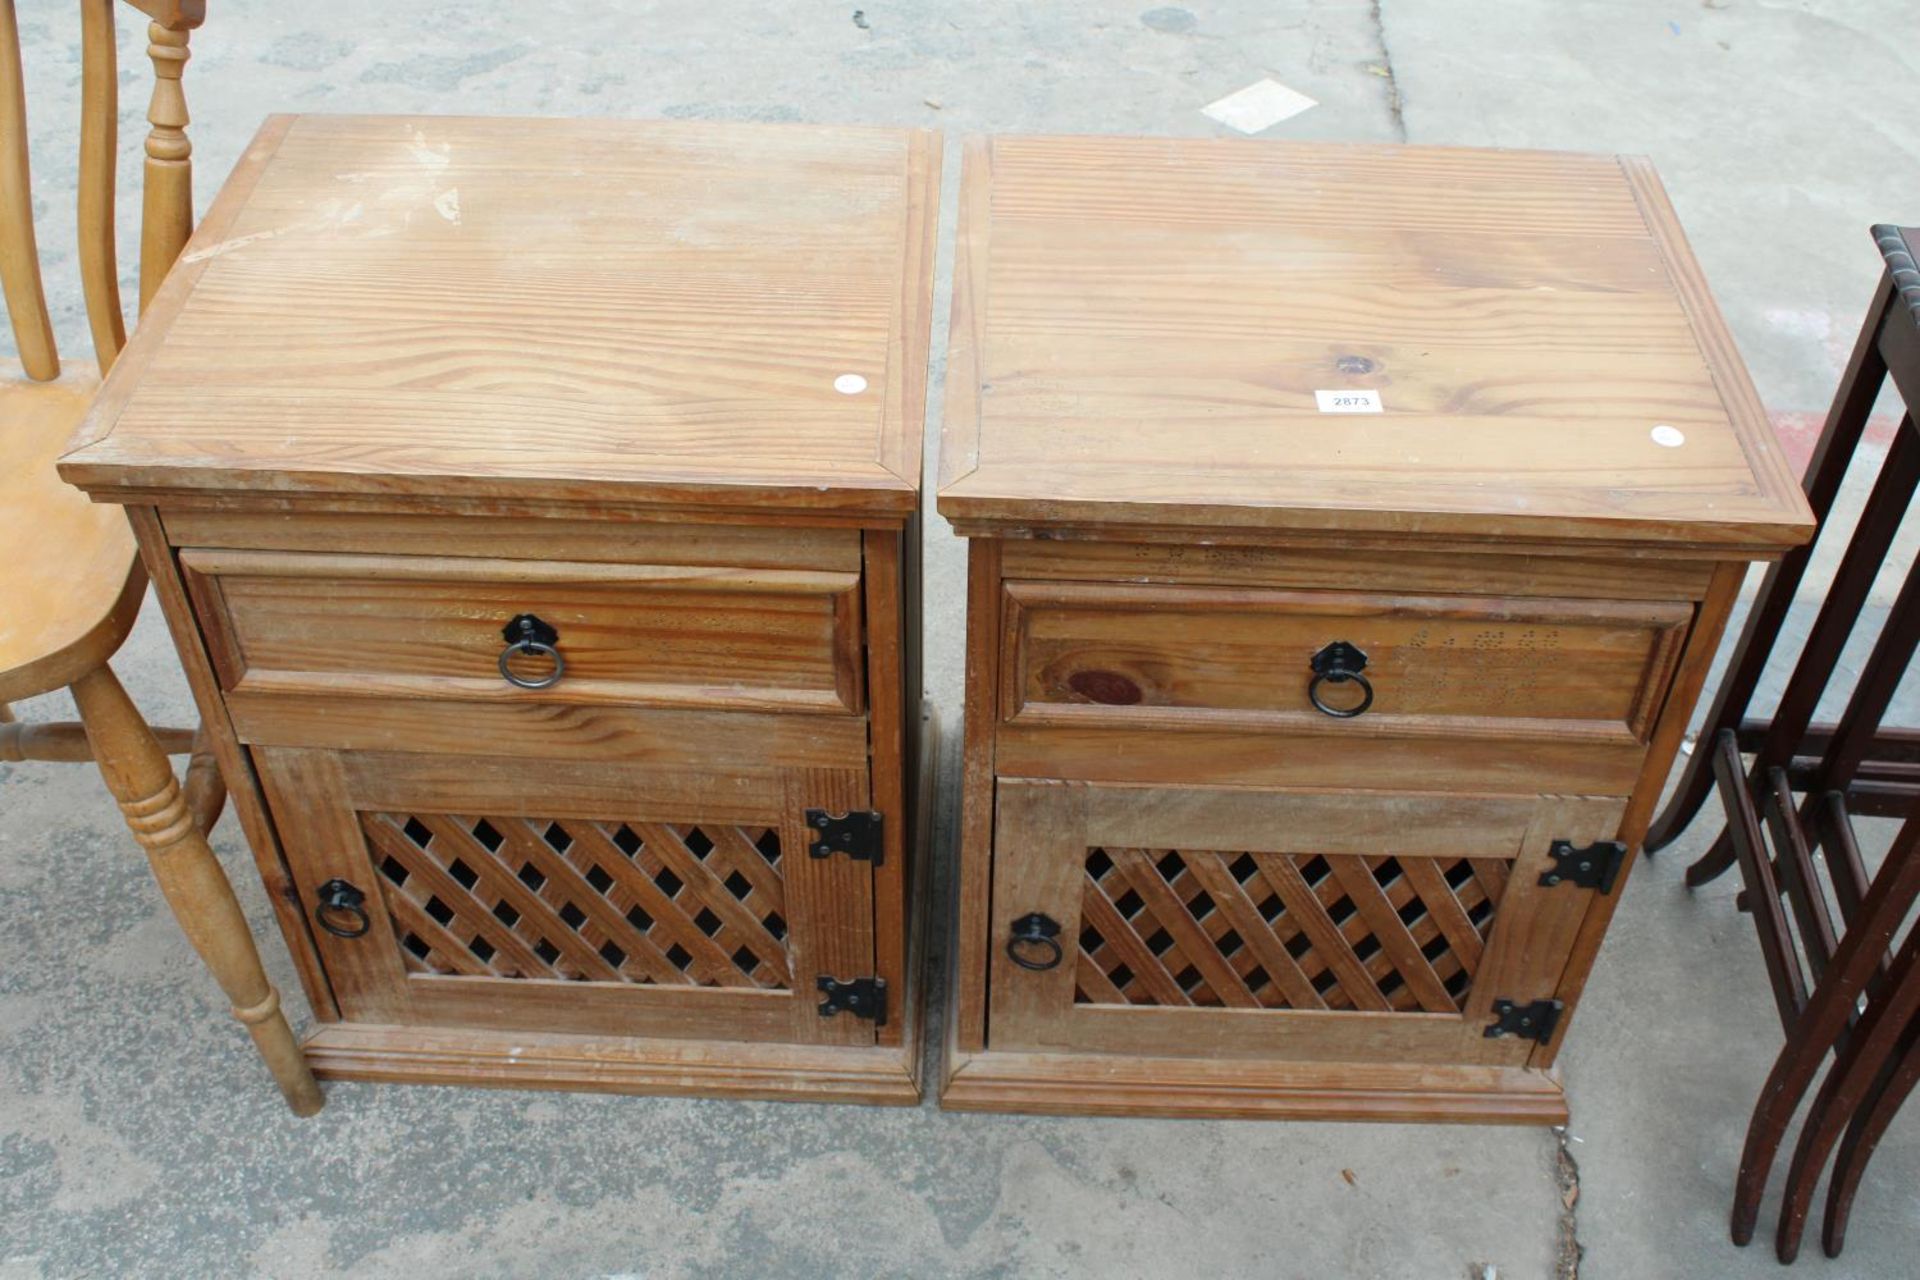 A PAIR OF MEXICAN PINE BEDSIDE CUPBOARDS WITH LATTICE WORK DOORS